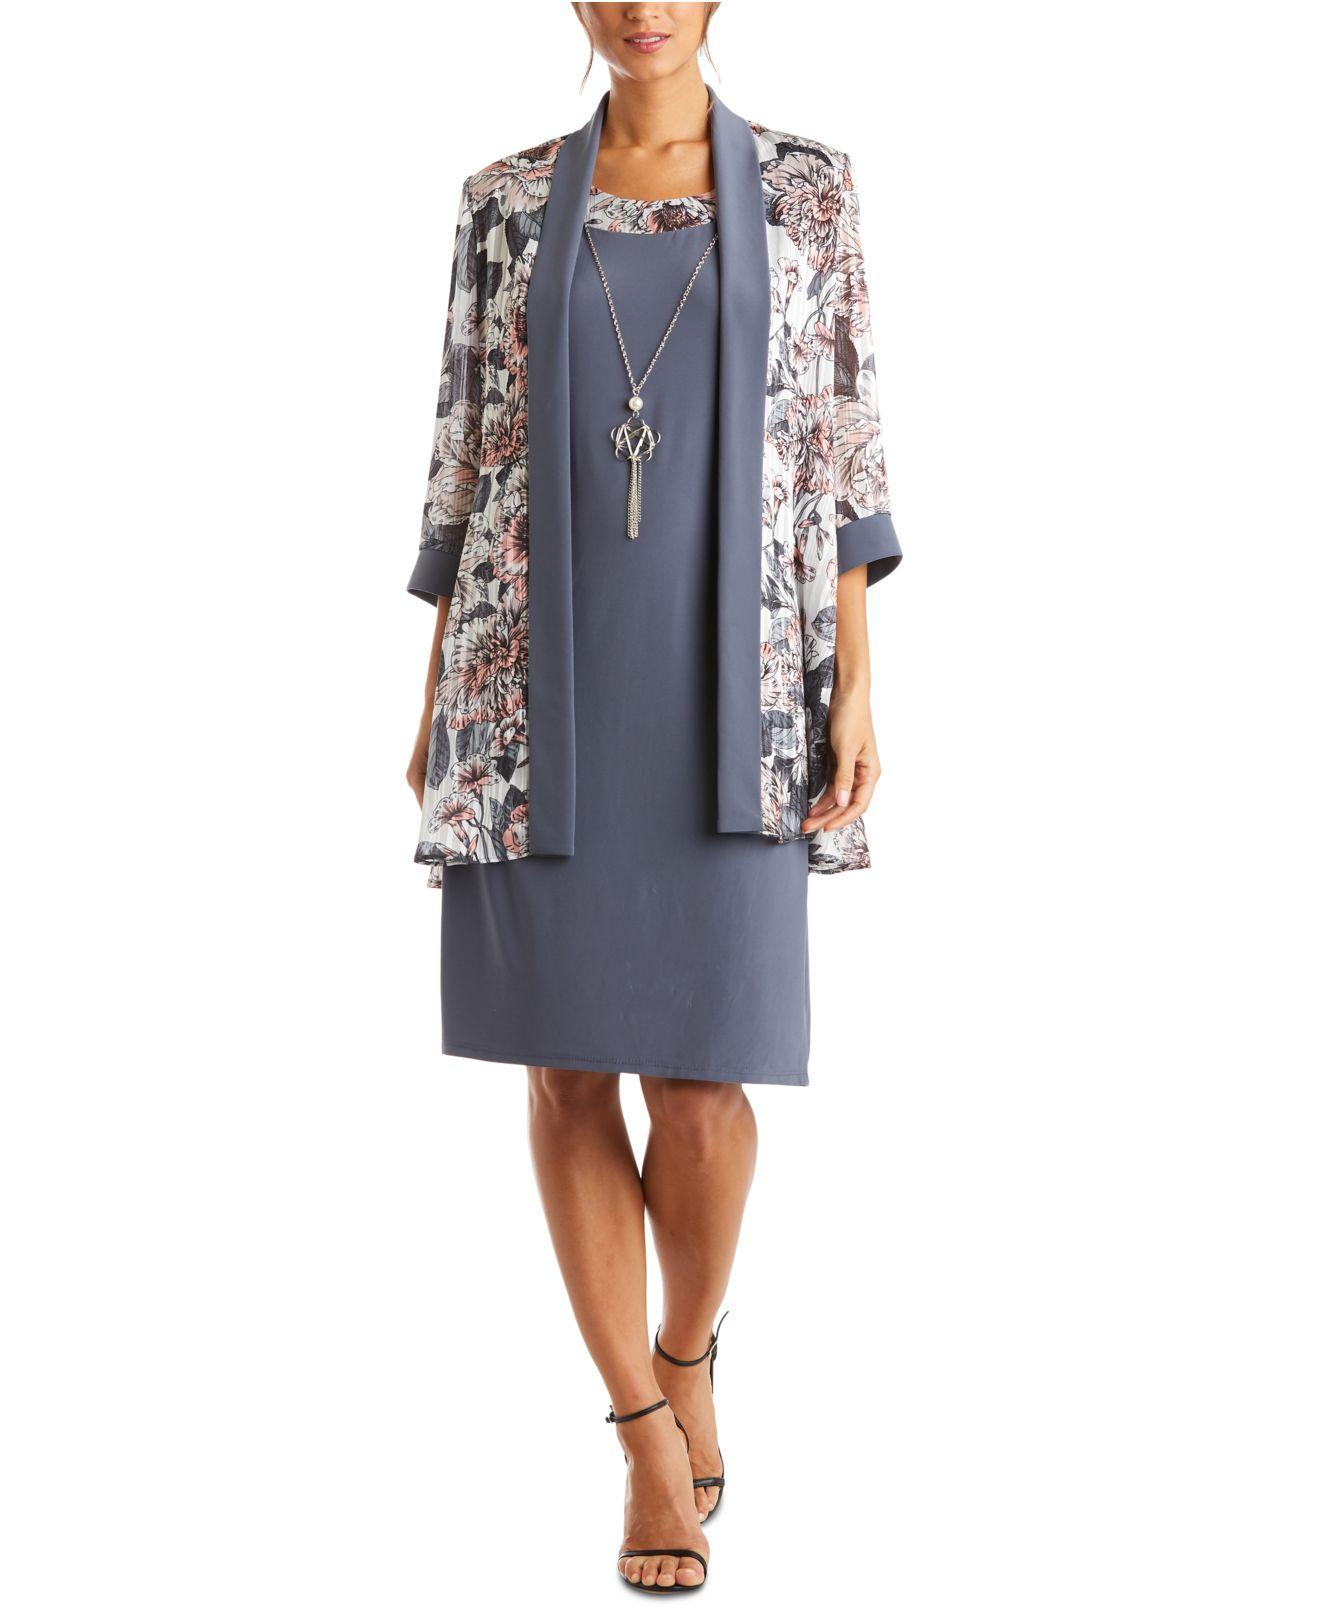 R & M Richards Petite Chiffon Jacket & Dress With Necklace in Grey ...